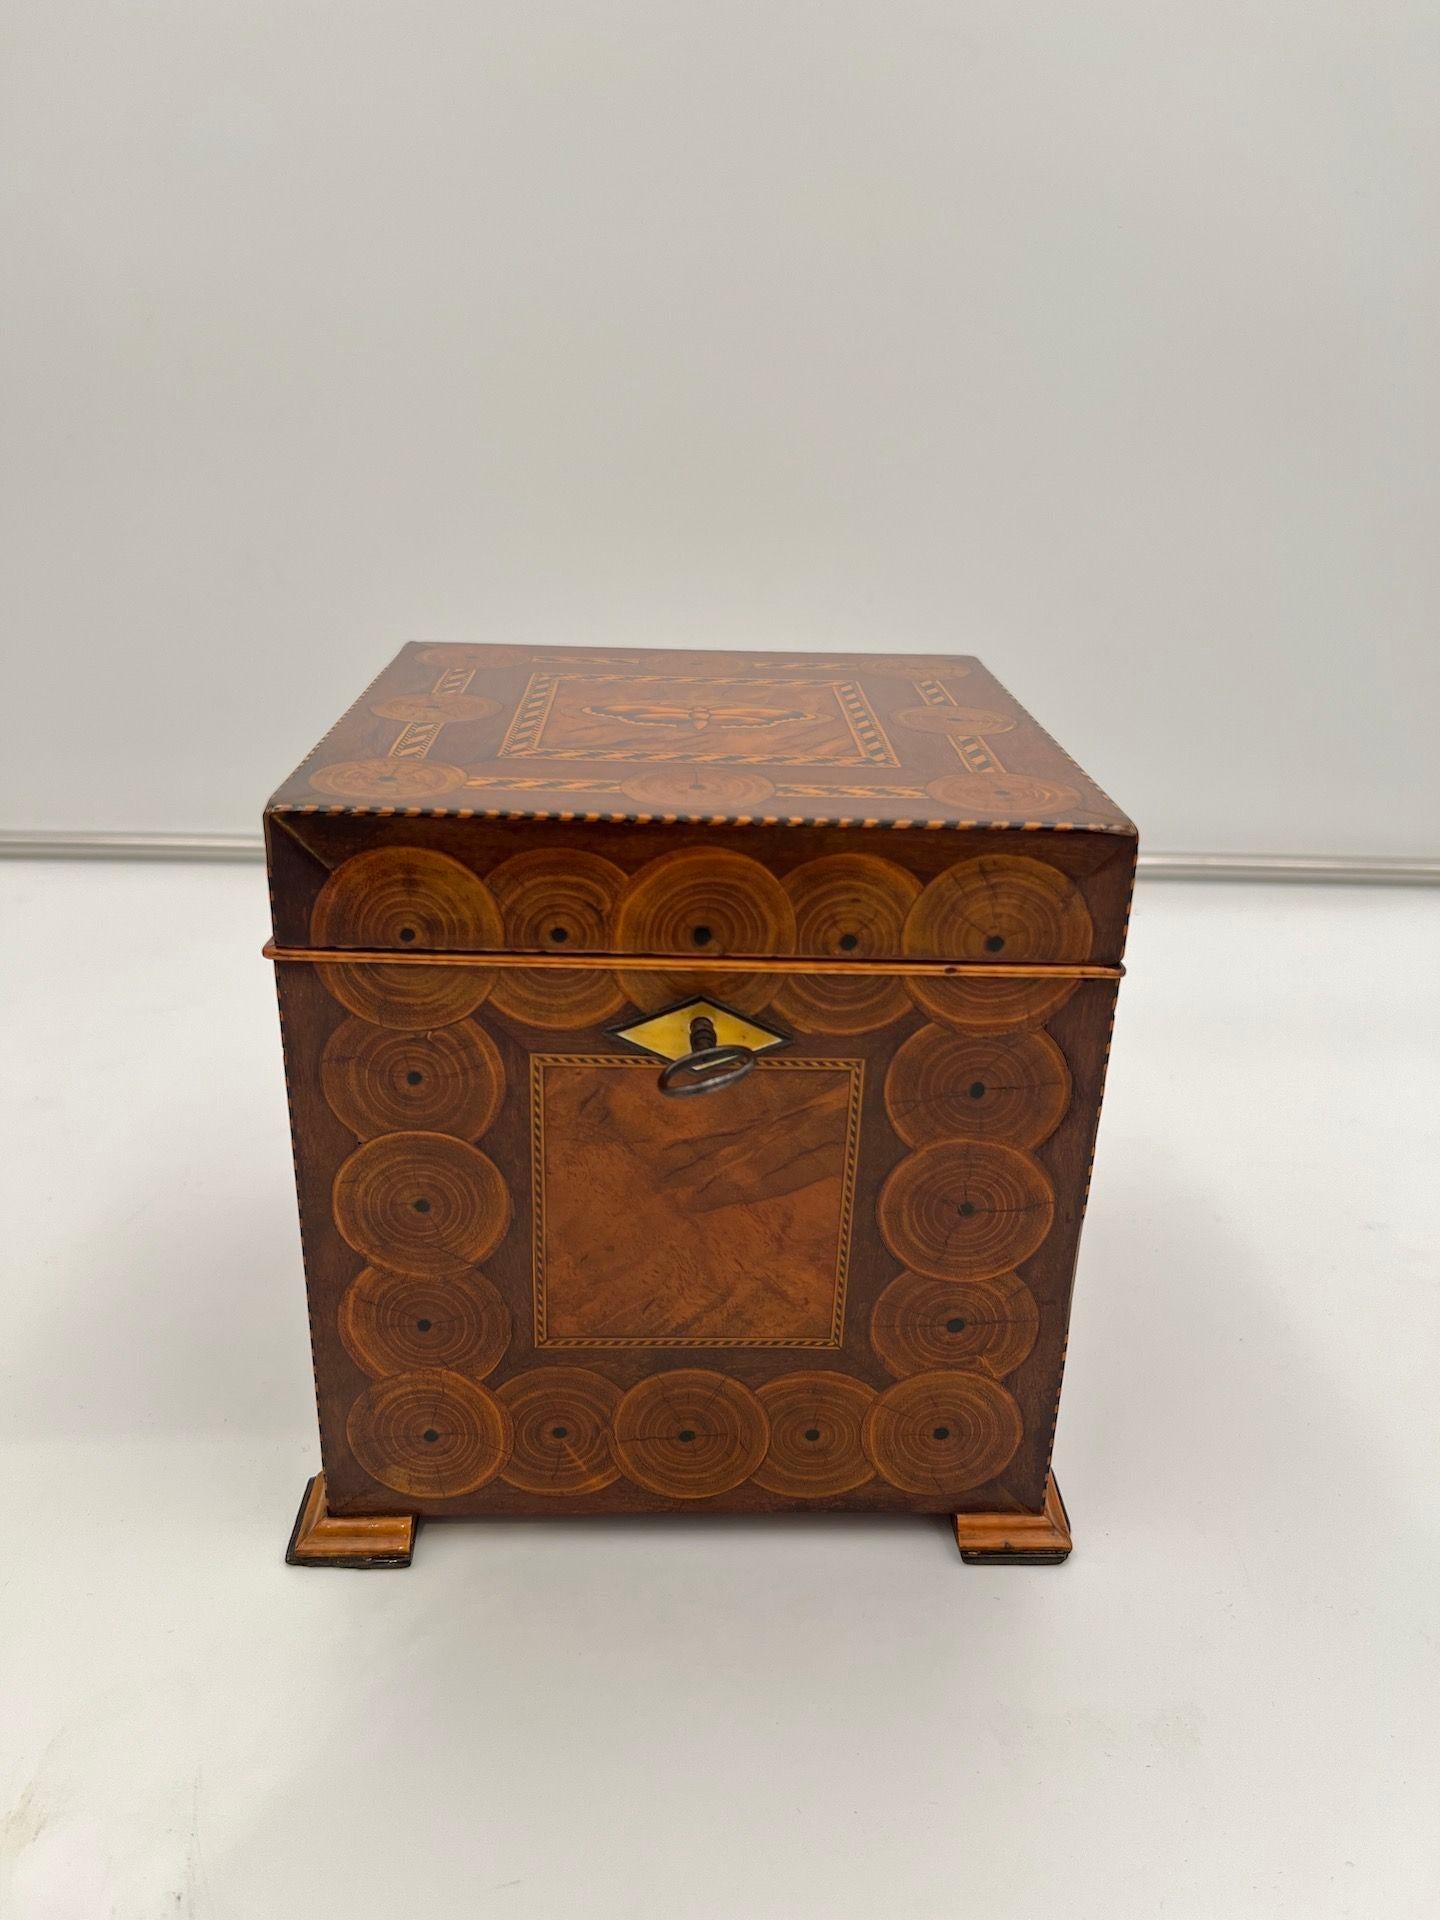 Cube-shaped, elaborately crafted Biedermeier casket. Walnut veneered.
Inlay work with branch slices and mahogany veneer. Several band inlays in maple and ebony.
Top center with inlaid butterfly in maple with fire burnt decor. Interior covered with